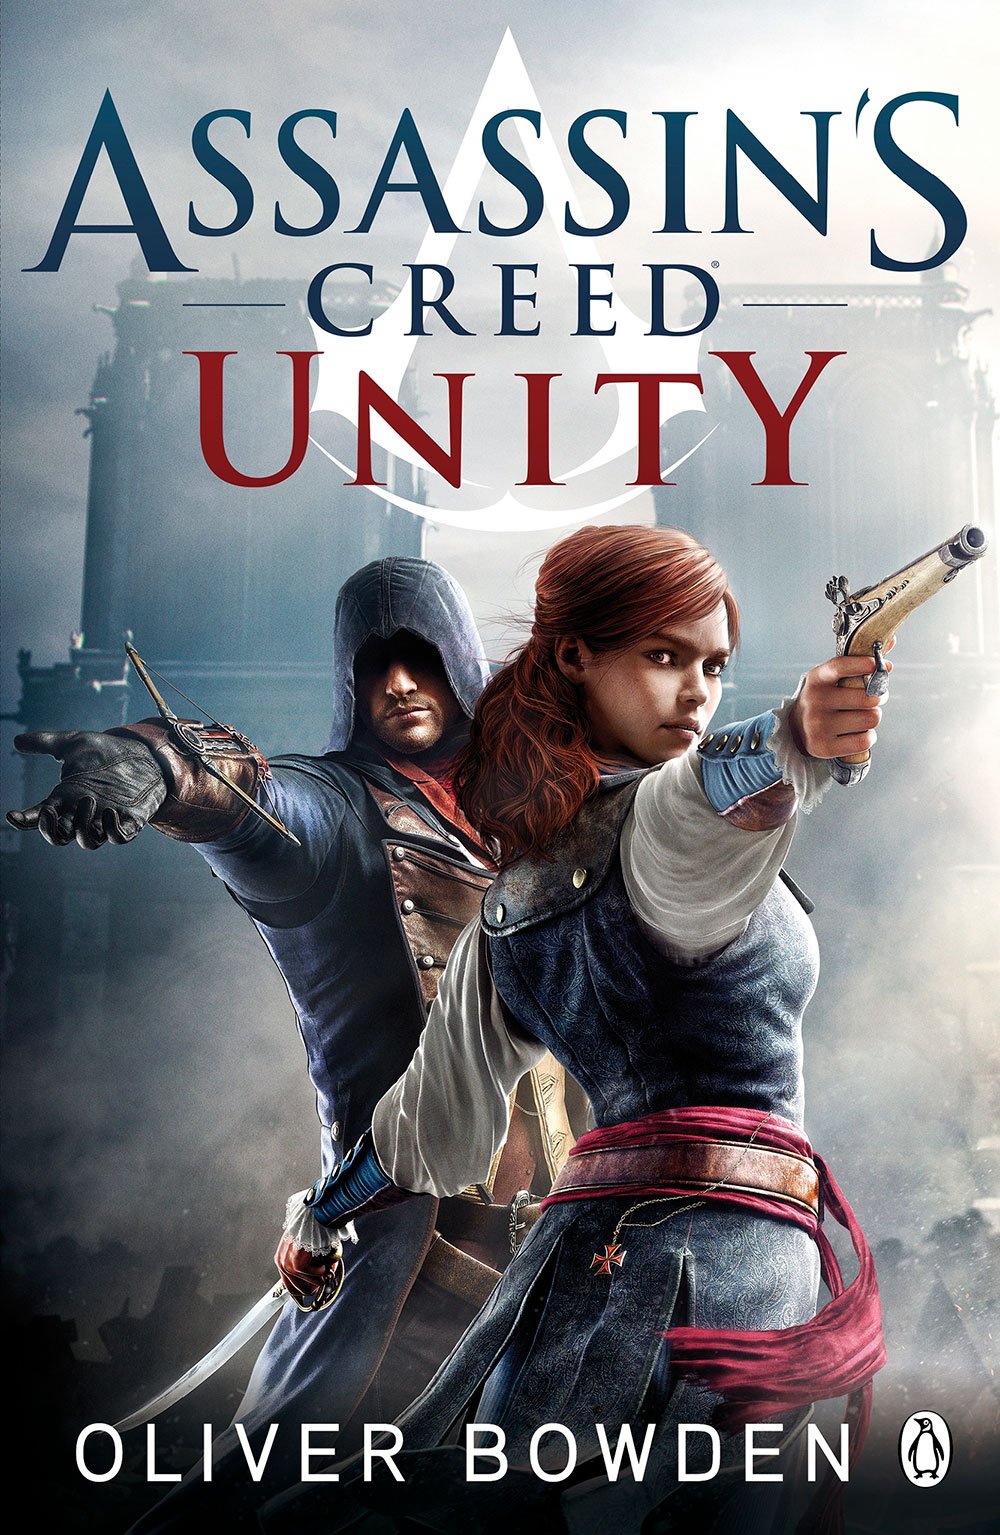 assassins creed unity ending